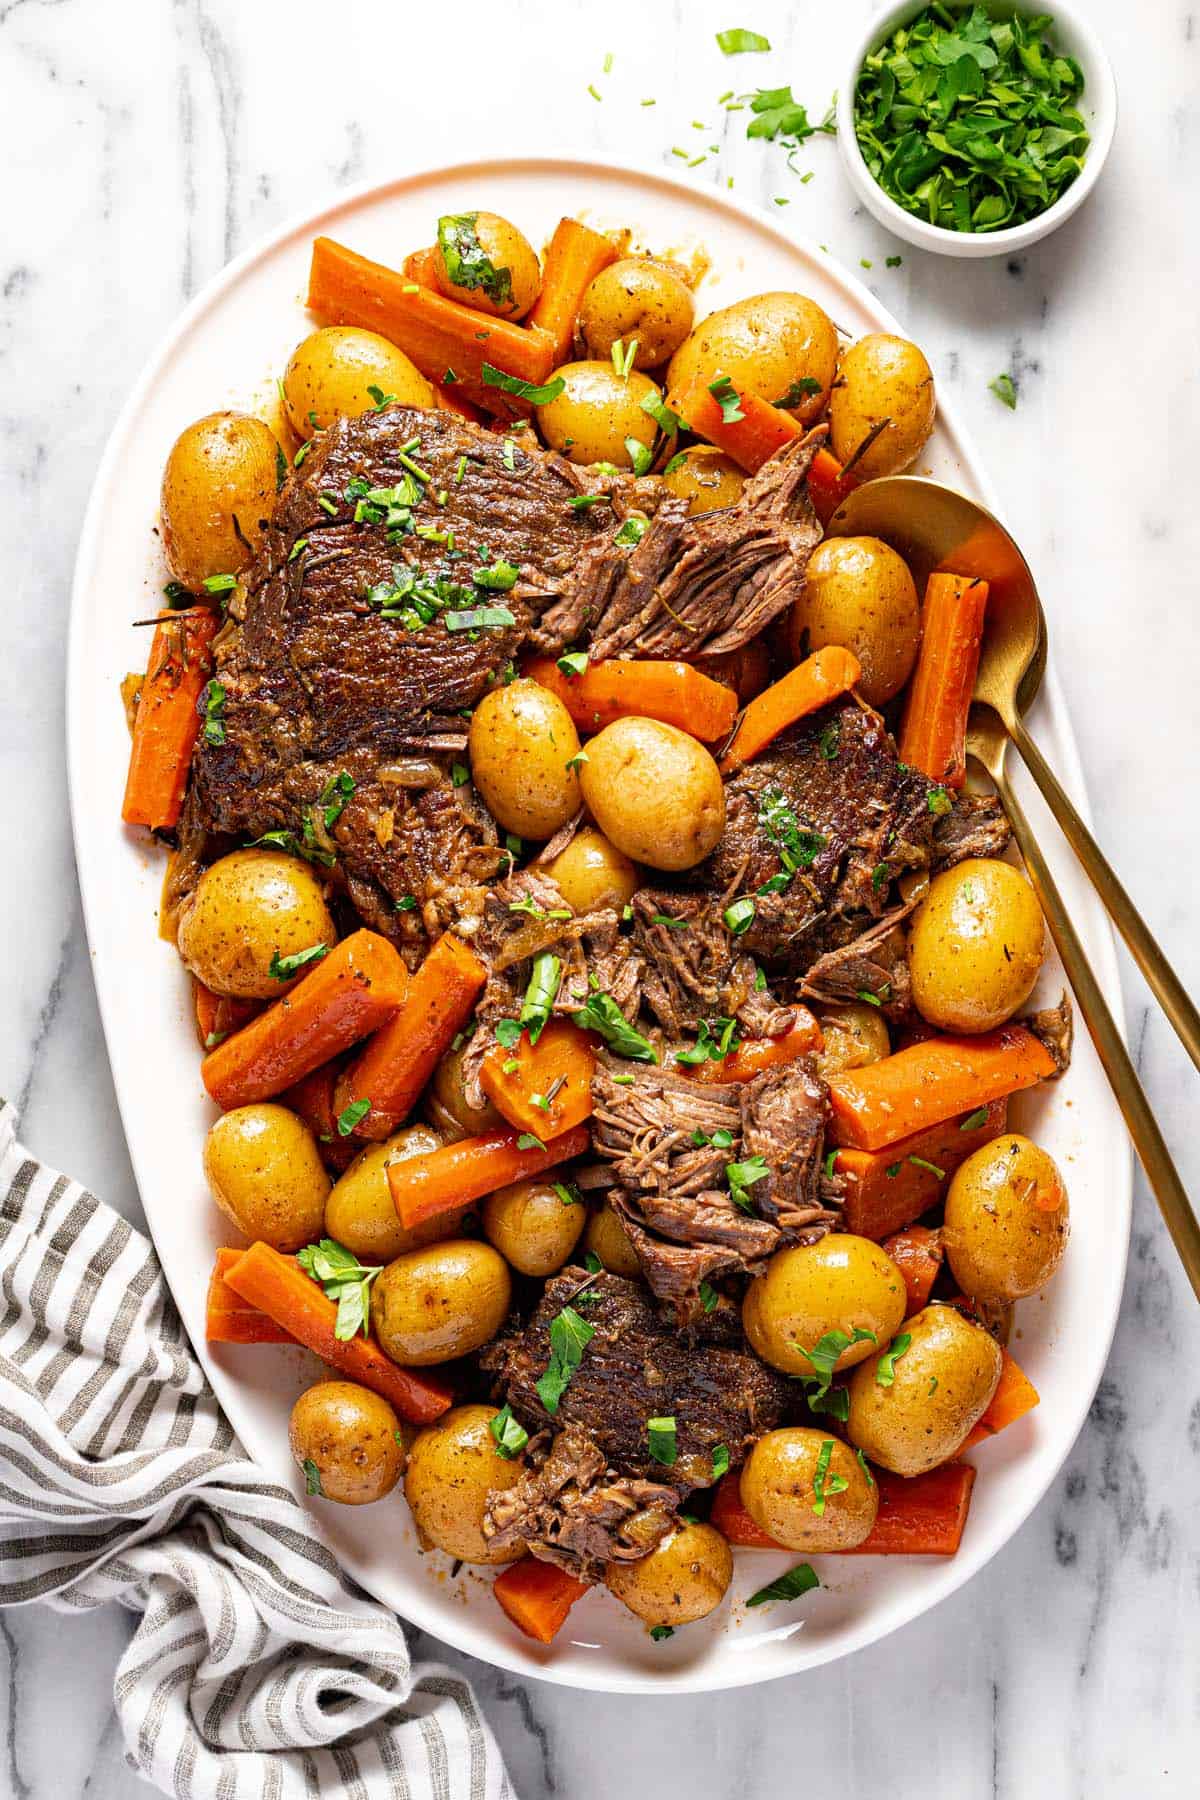 Large serving platter filled with shredded pot roast, carrots, and potatoes garnished with parsley. 